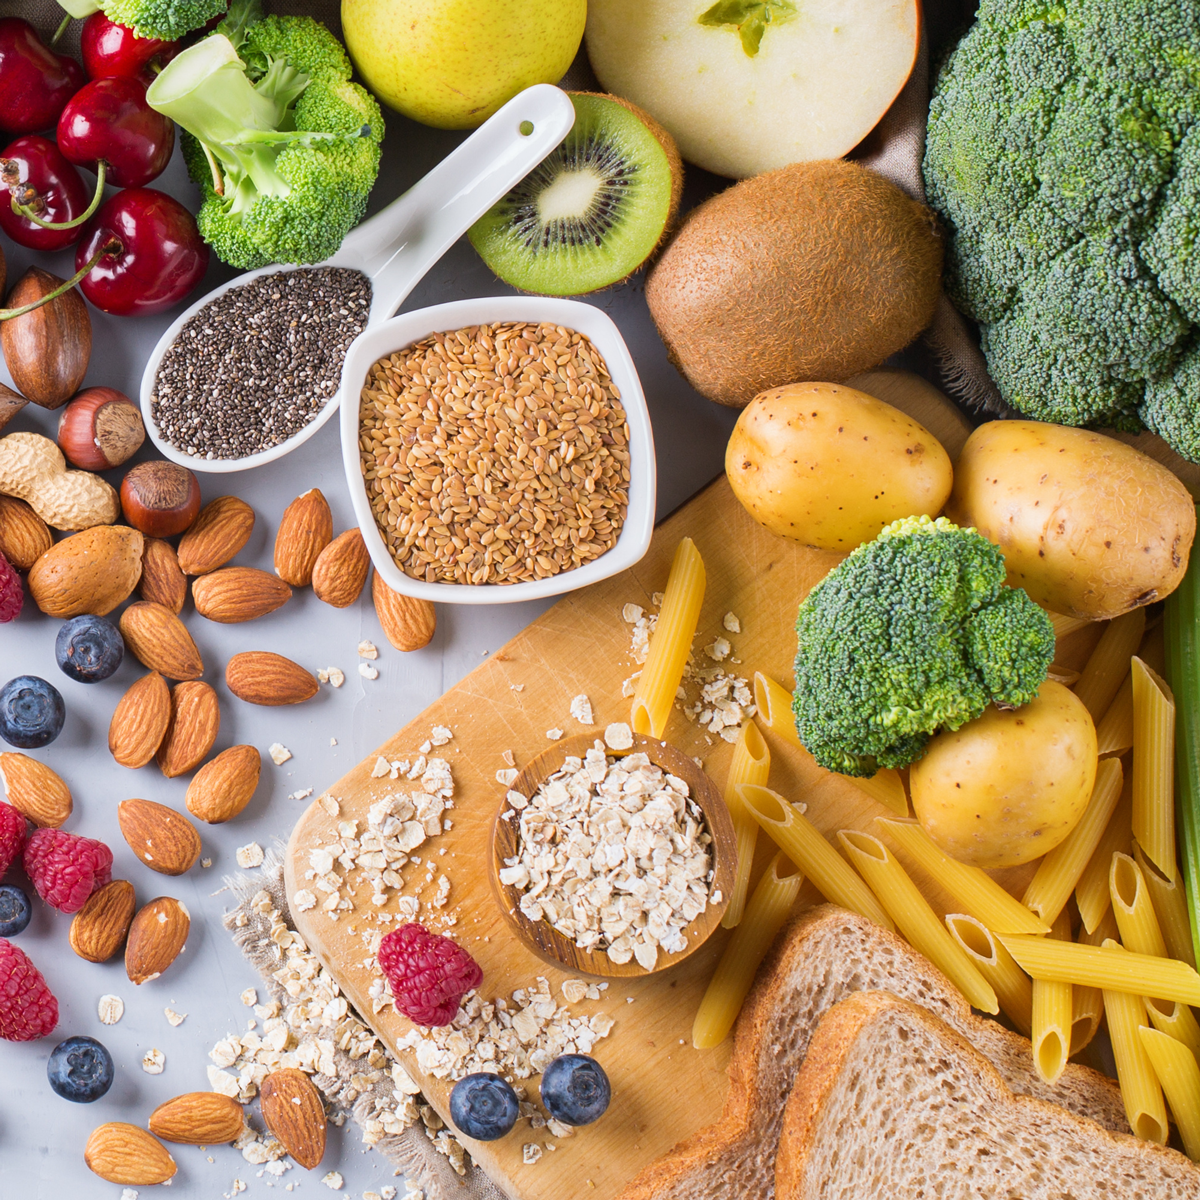 Dietary Fiber: How Much to Consume and in Which Foods to Find It